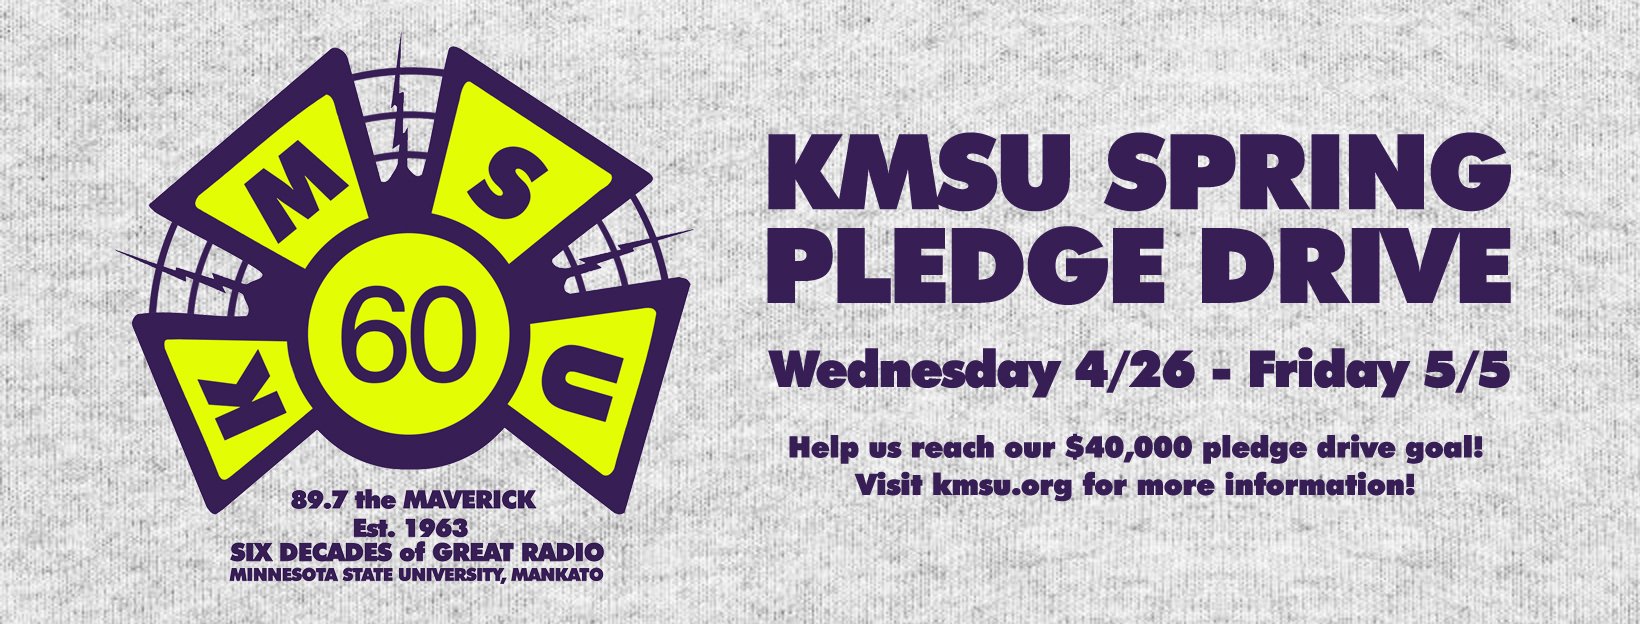 KMSU Spring Pledge Drive Wednesday April 26th through Friday, May 5th